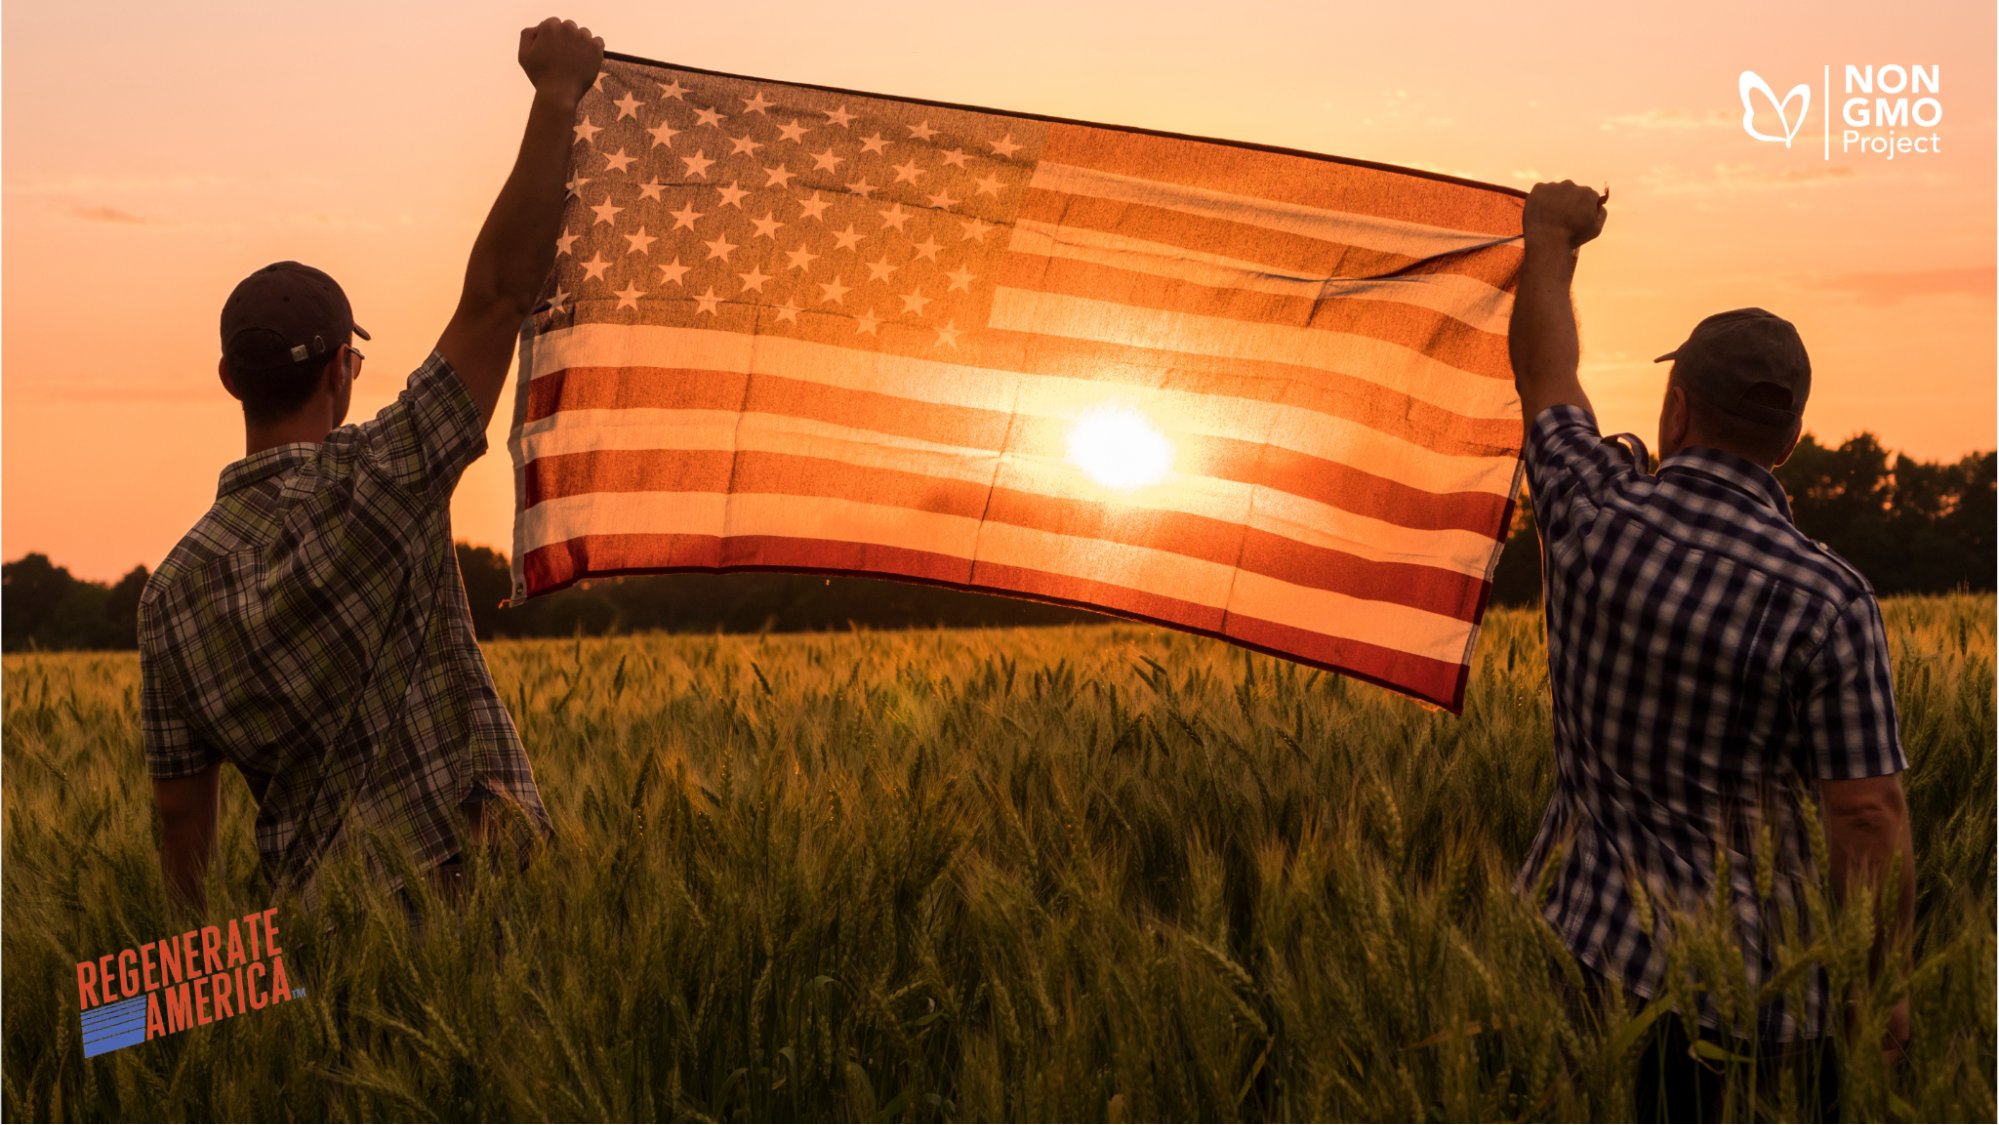 Two men holding the American flag, standing in an agricultural field